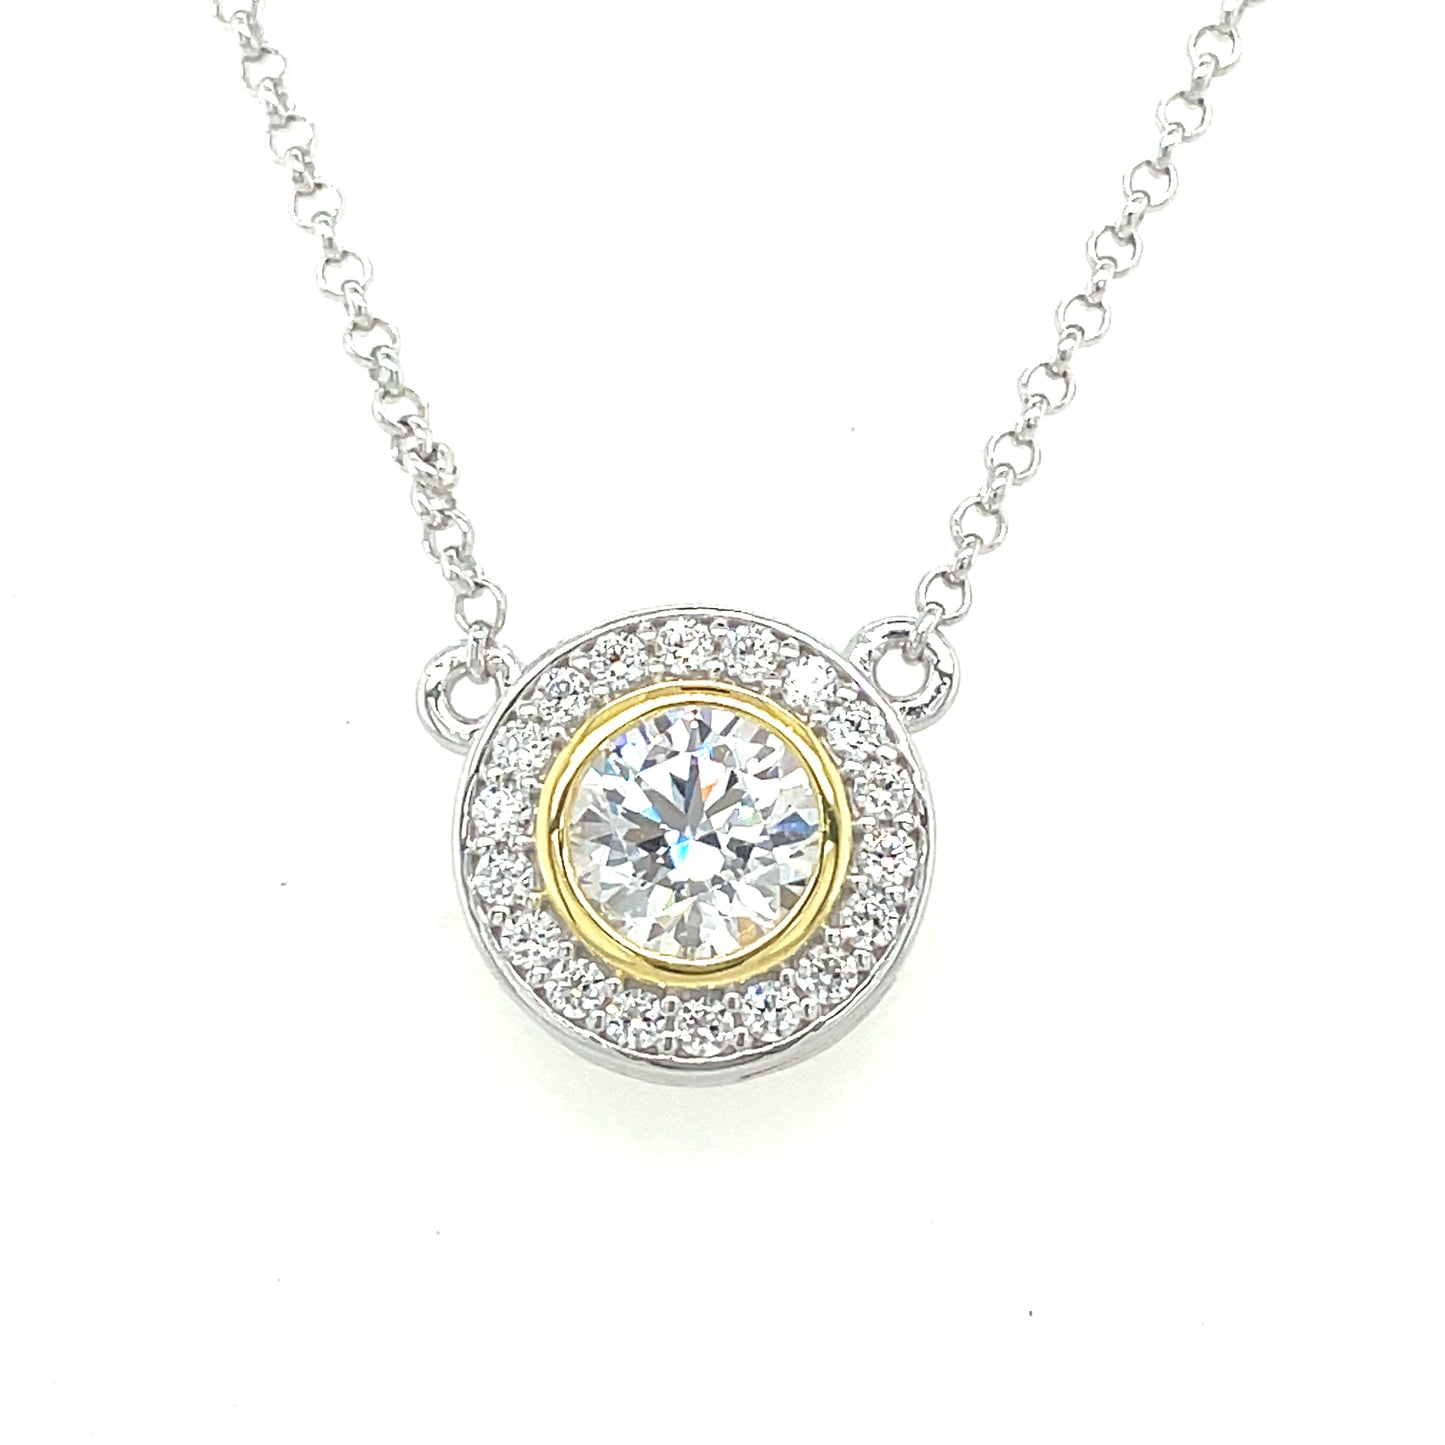 STERLING SILVER AND GOLD PLATED CUBIC ZIRCONIA NECKLET WITH RUBOVER SCATTER STONES